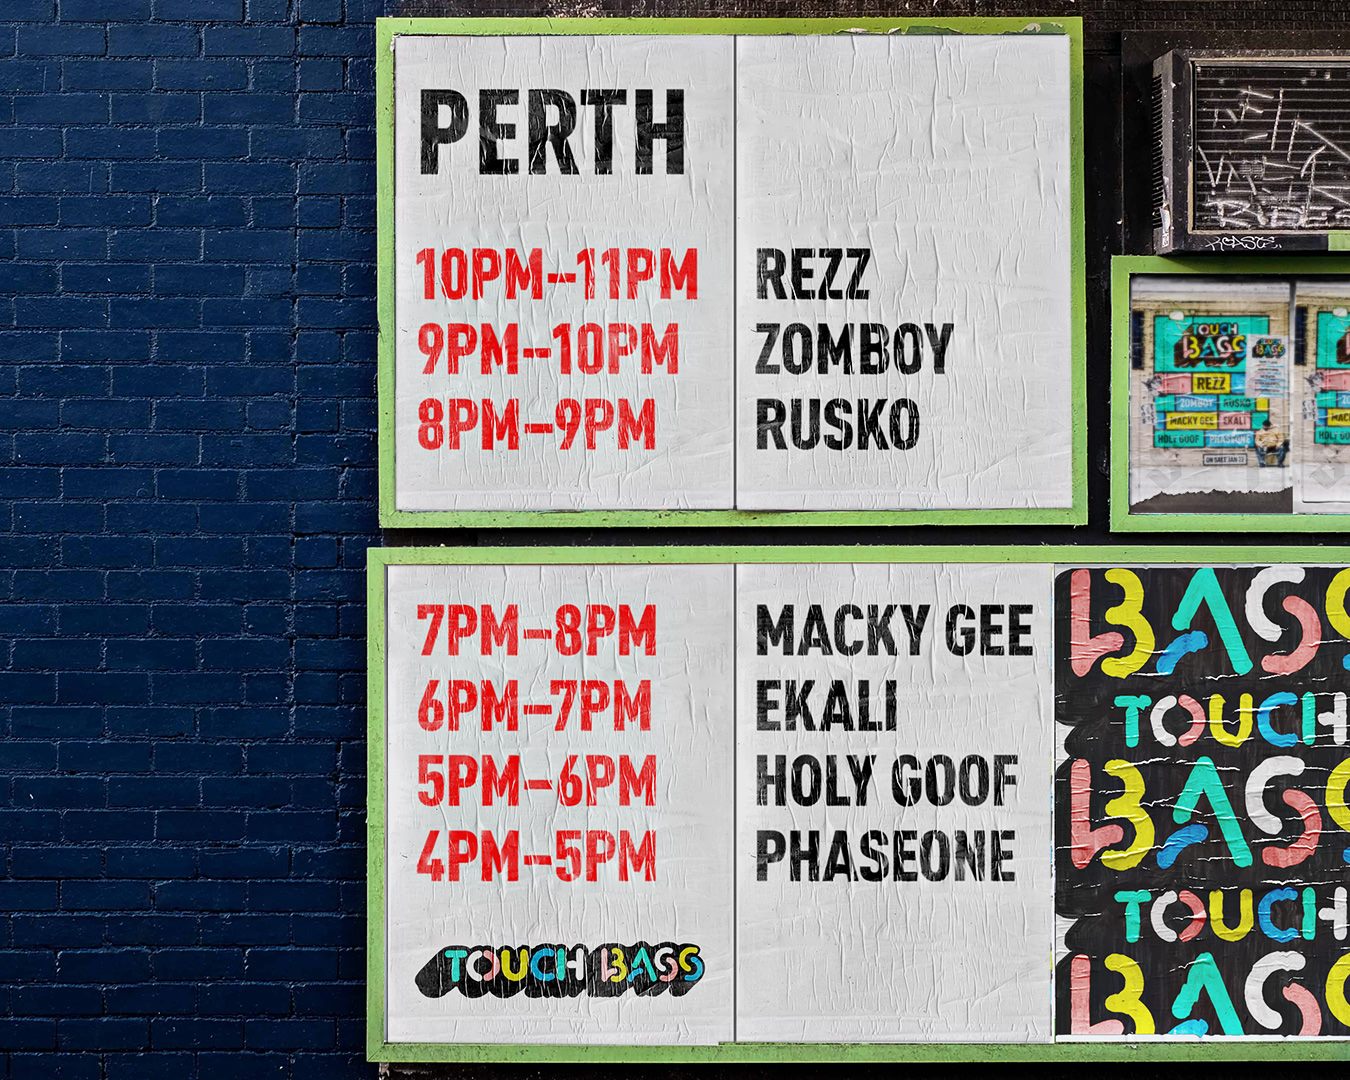 touch-bass-2019-set-times-perth